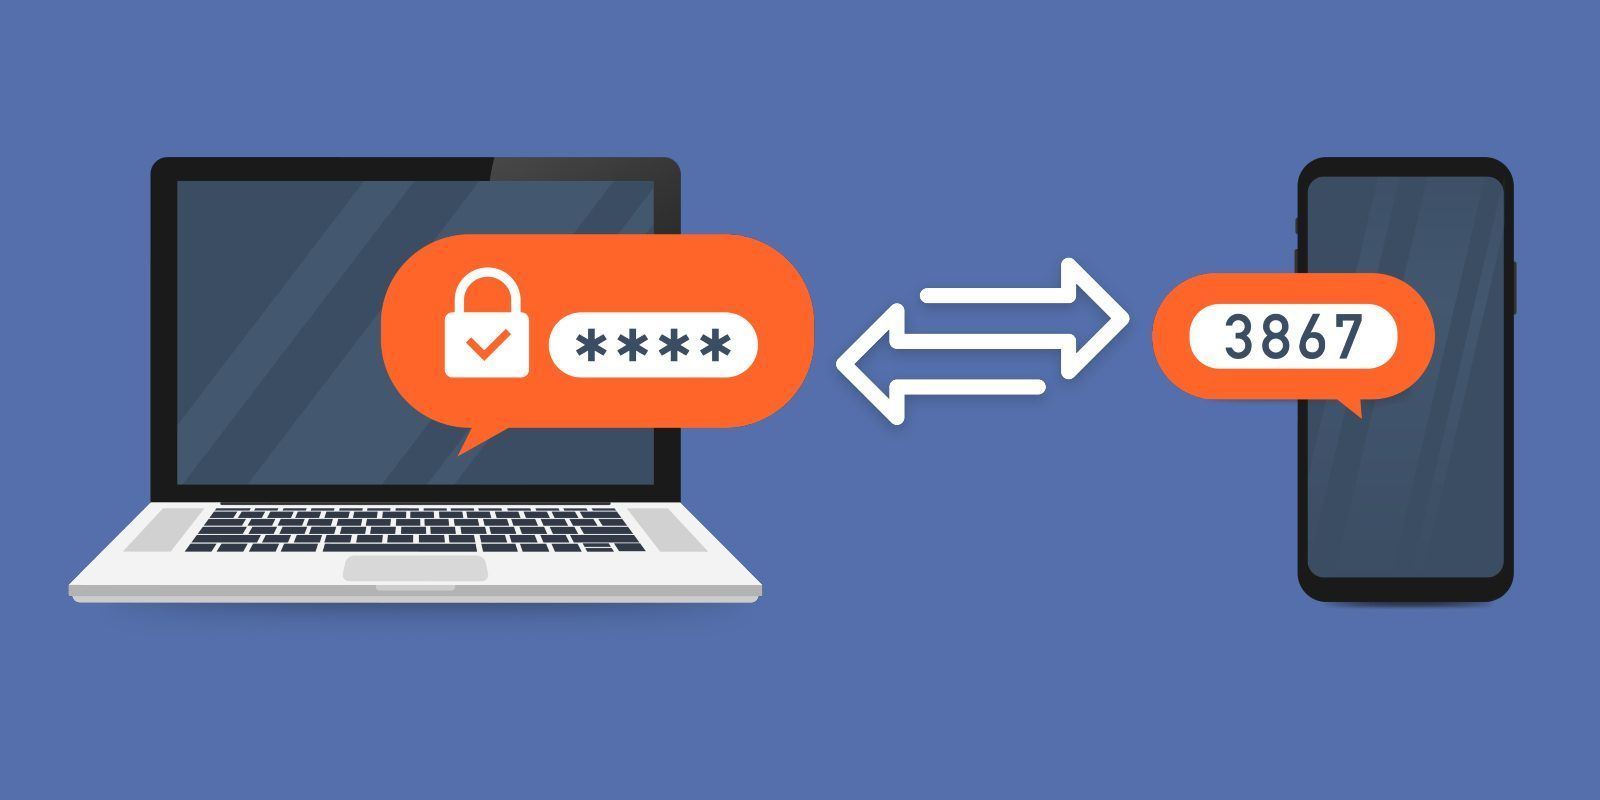 How Safe Is Two-Factor Authentication?